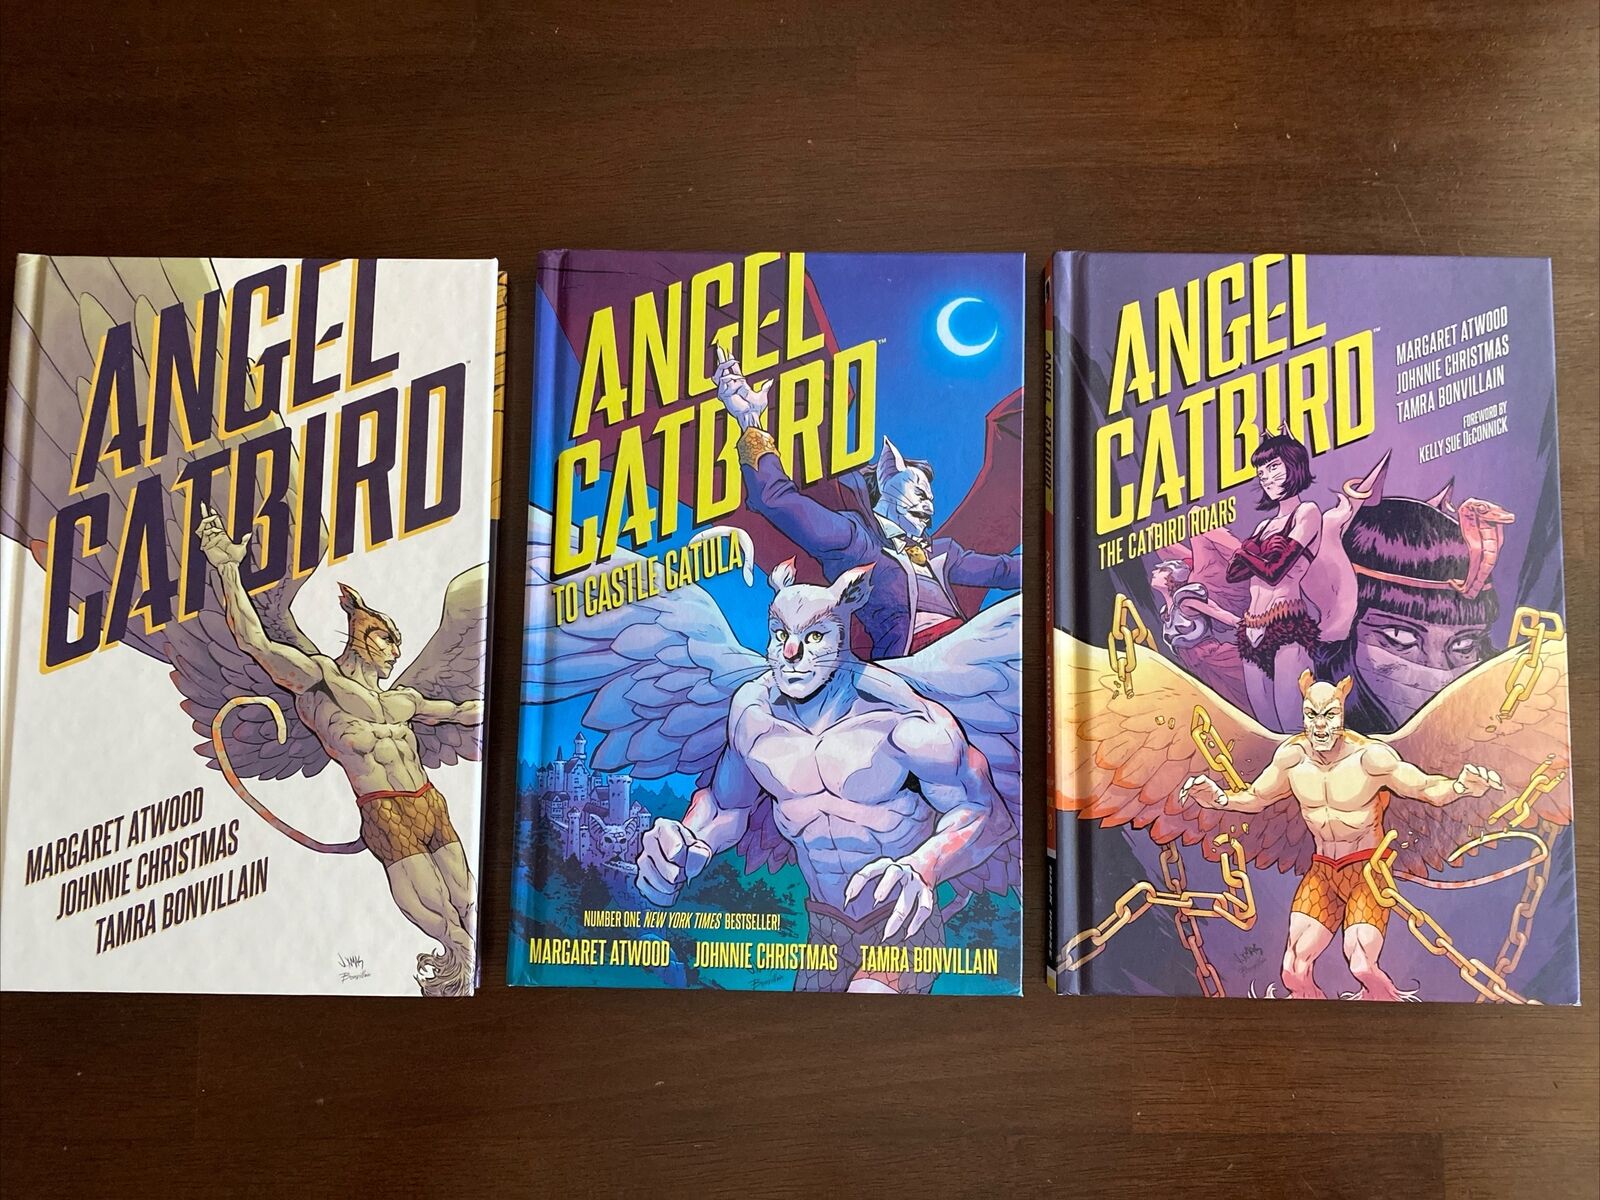 Angel Catbird-Vol 1,2,3 Hardcover First Editions-Dark Horse-Margaret Atwood